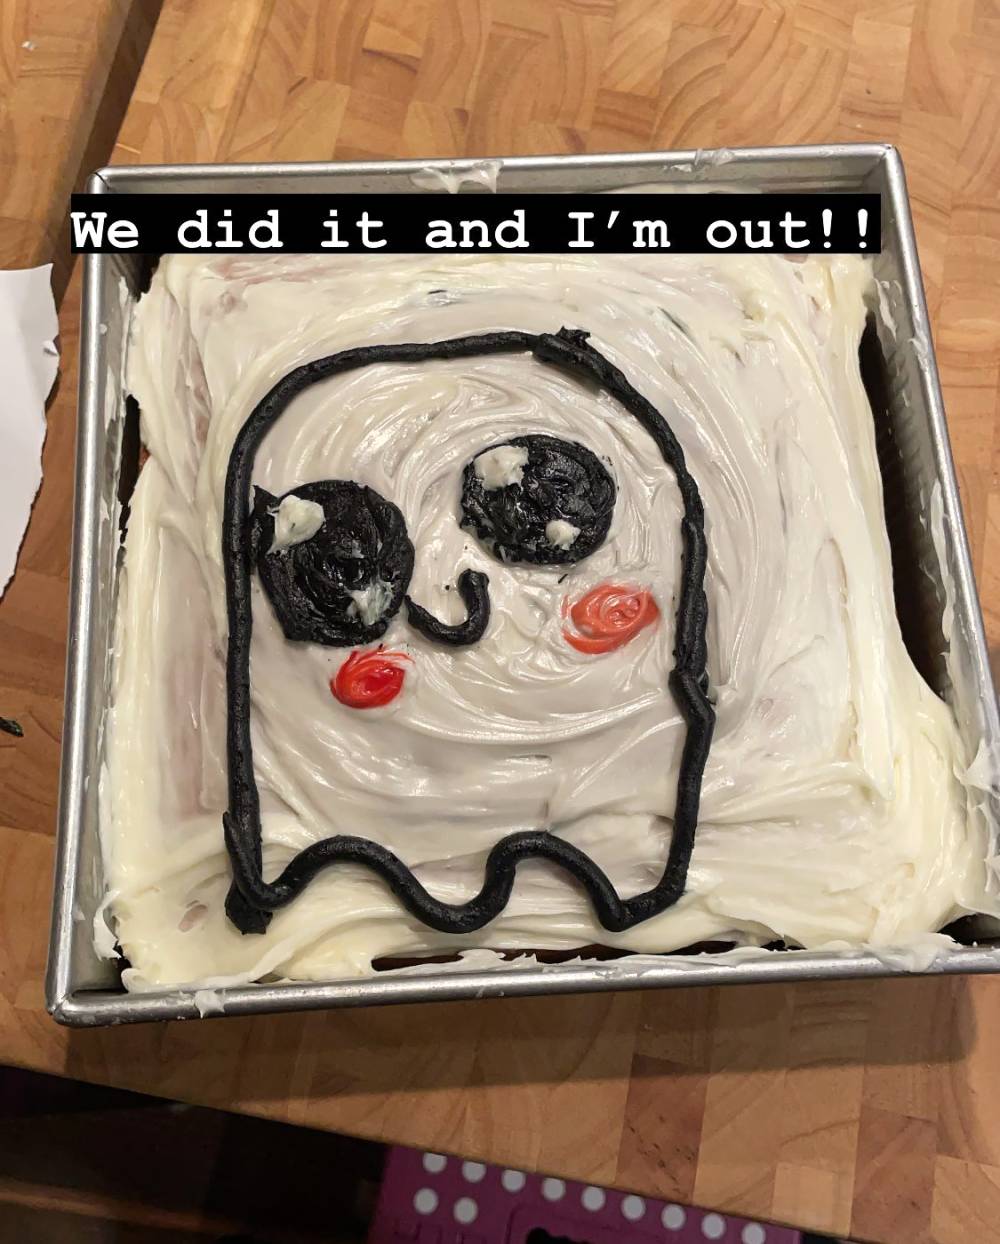 Channing Tatum and Daughter Everly Are Ready for Halloween With Homemade Ghost Cake: 'We Did It!'